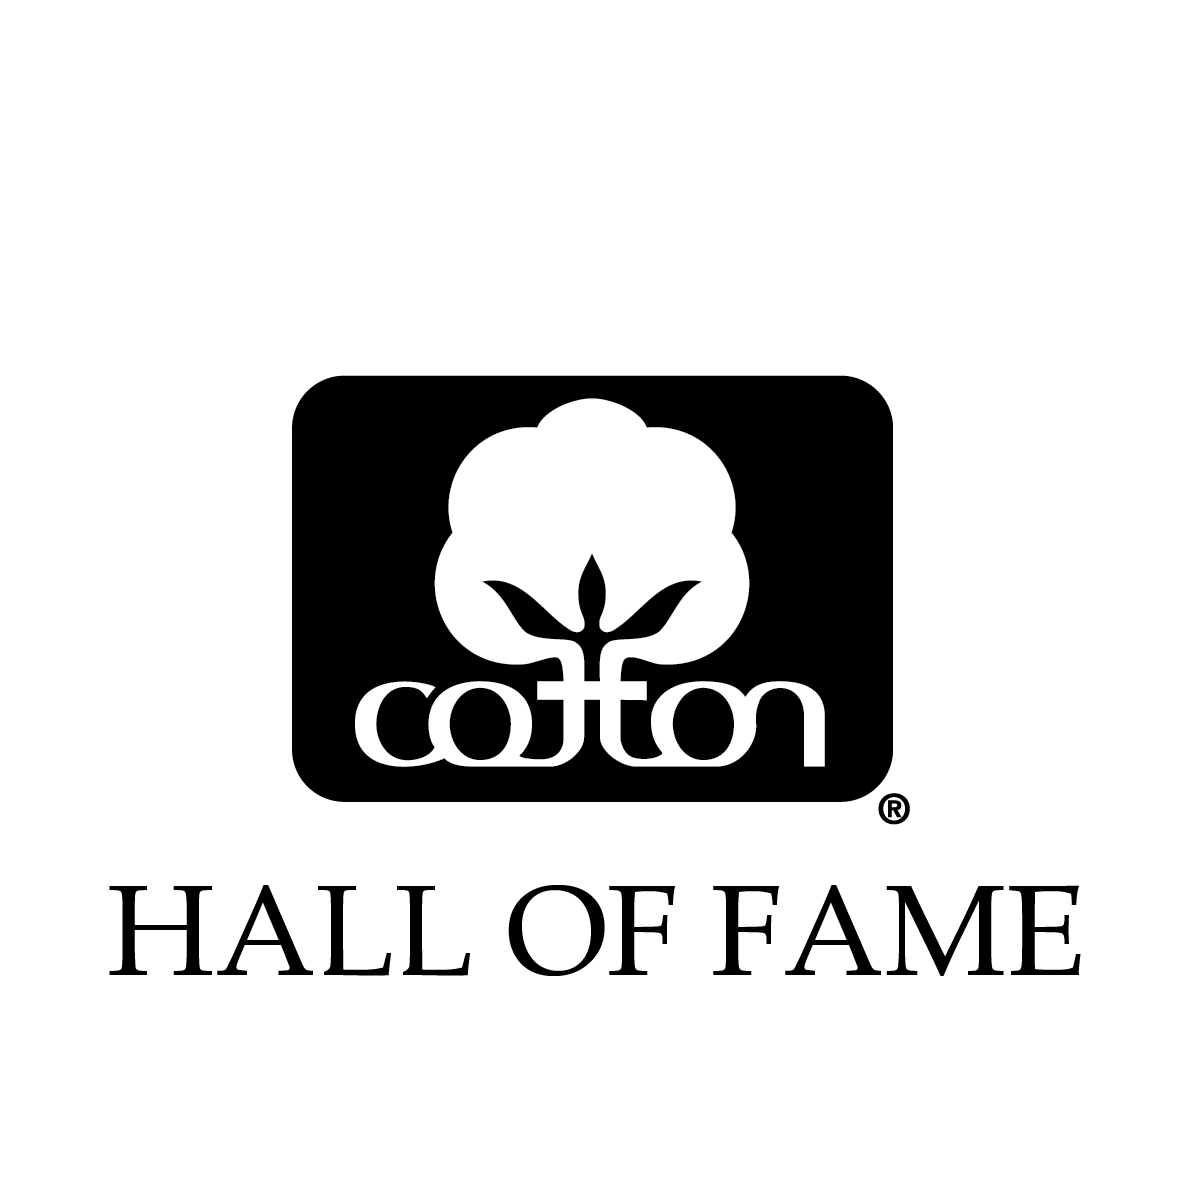 Cotton Seal Positive Negative HALLOFFAME - Cotton Research and Promotion Program Hall of Fame 2022 Inductees Announced